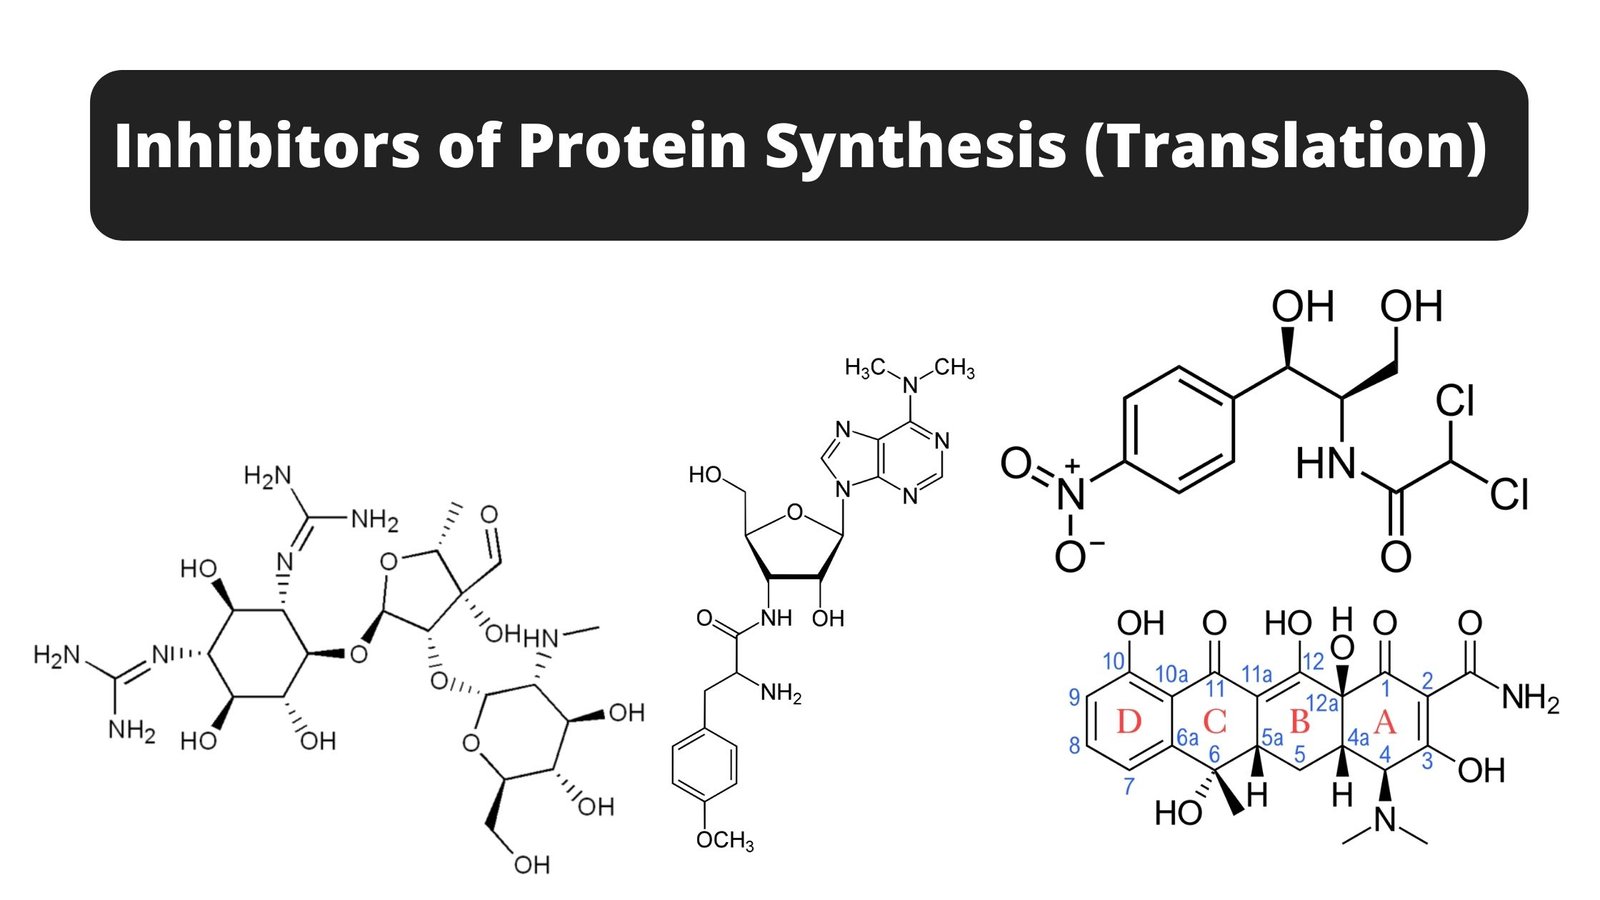 Protein Synthesis Inhibitors - Definition, Mechanism, Examples